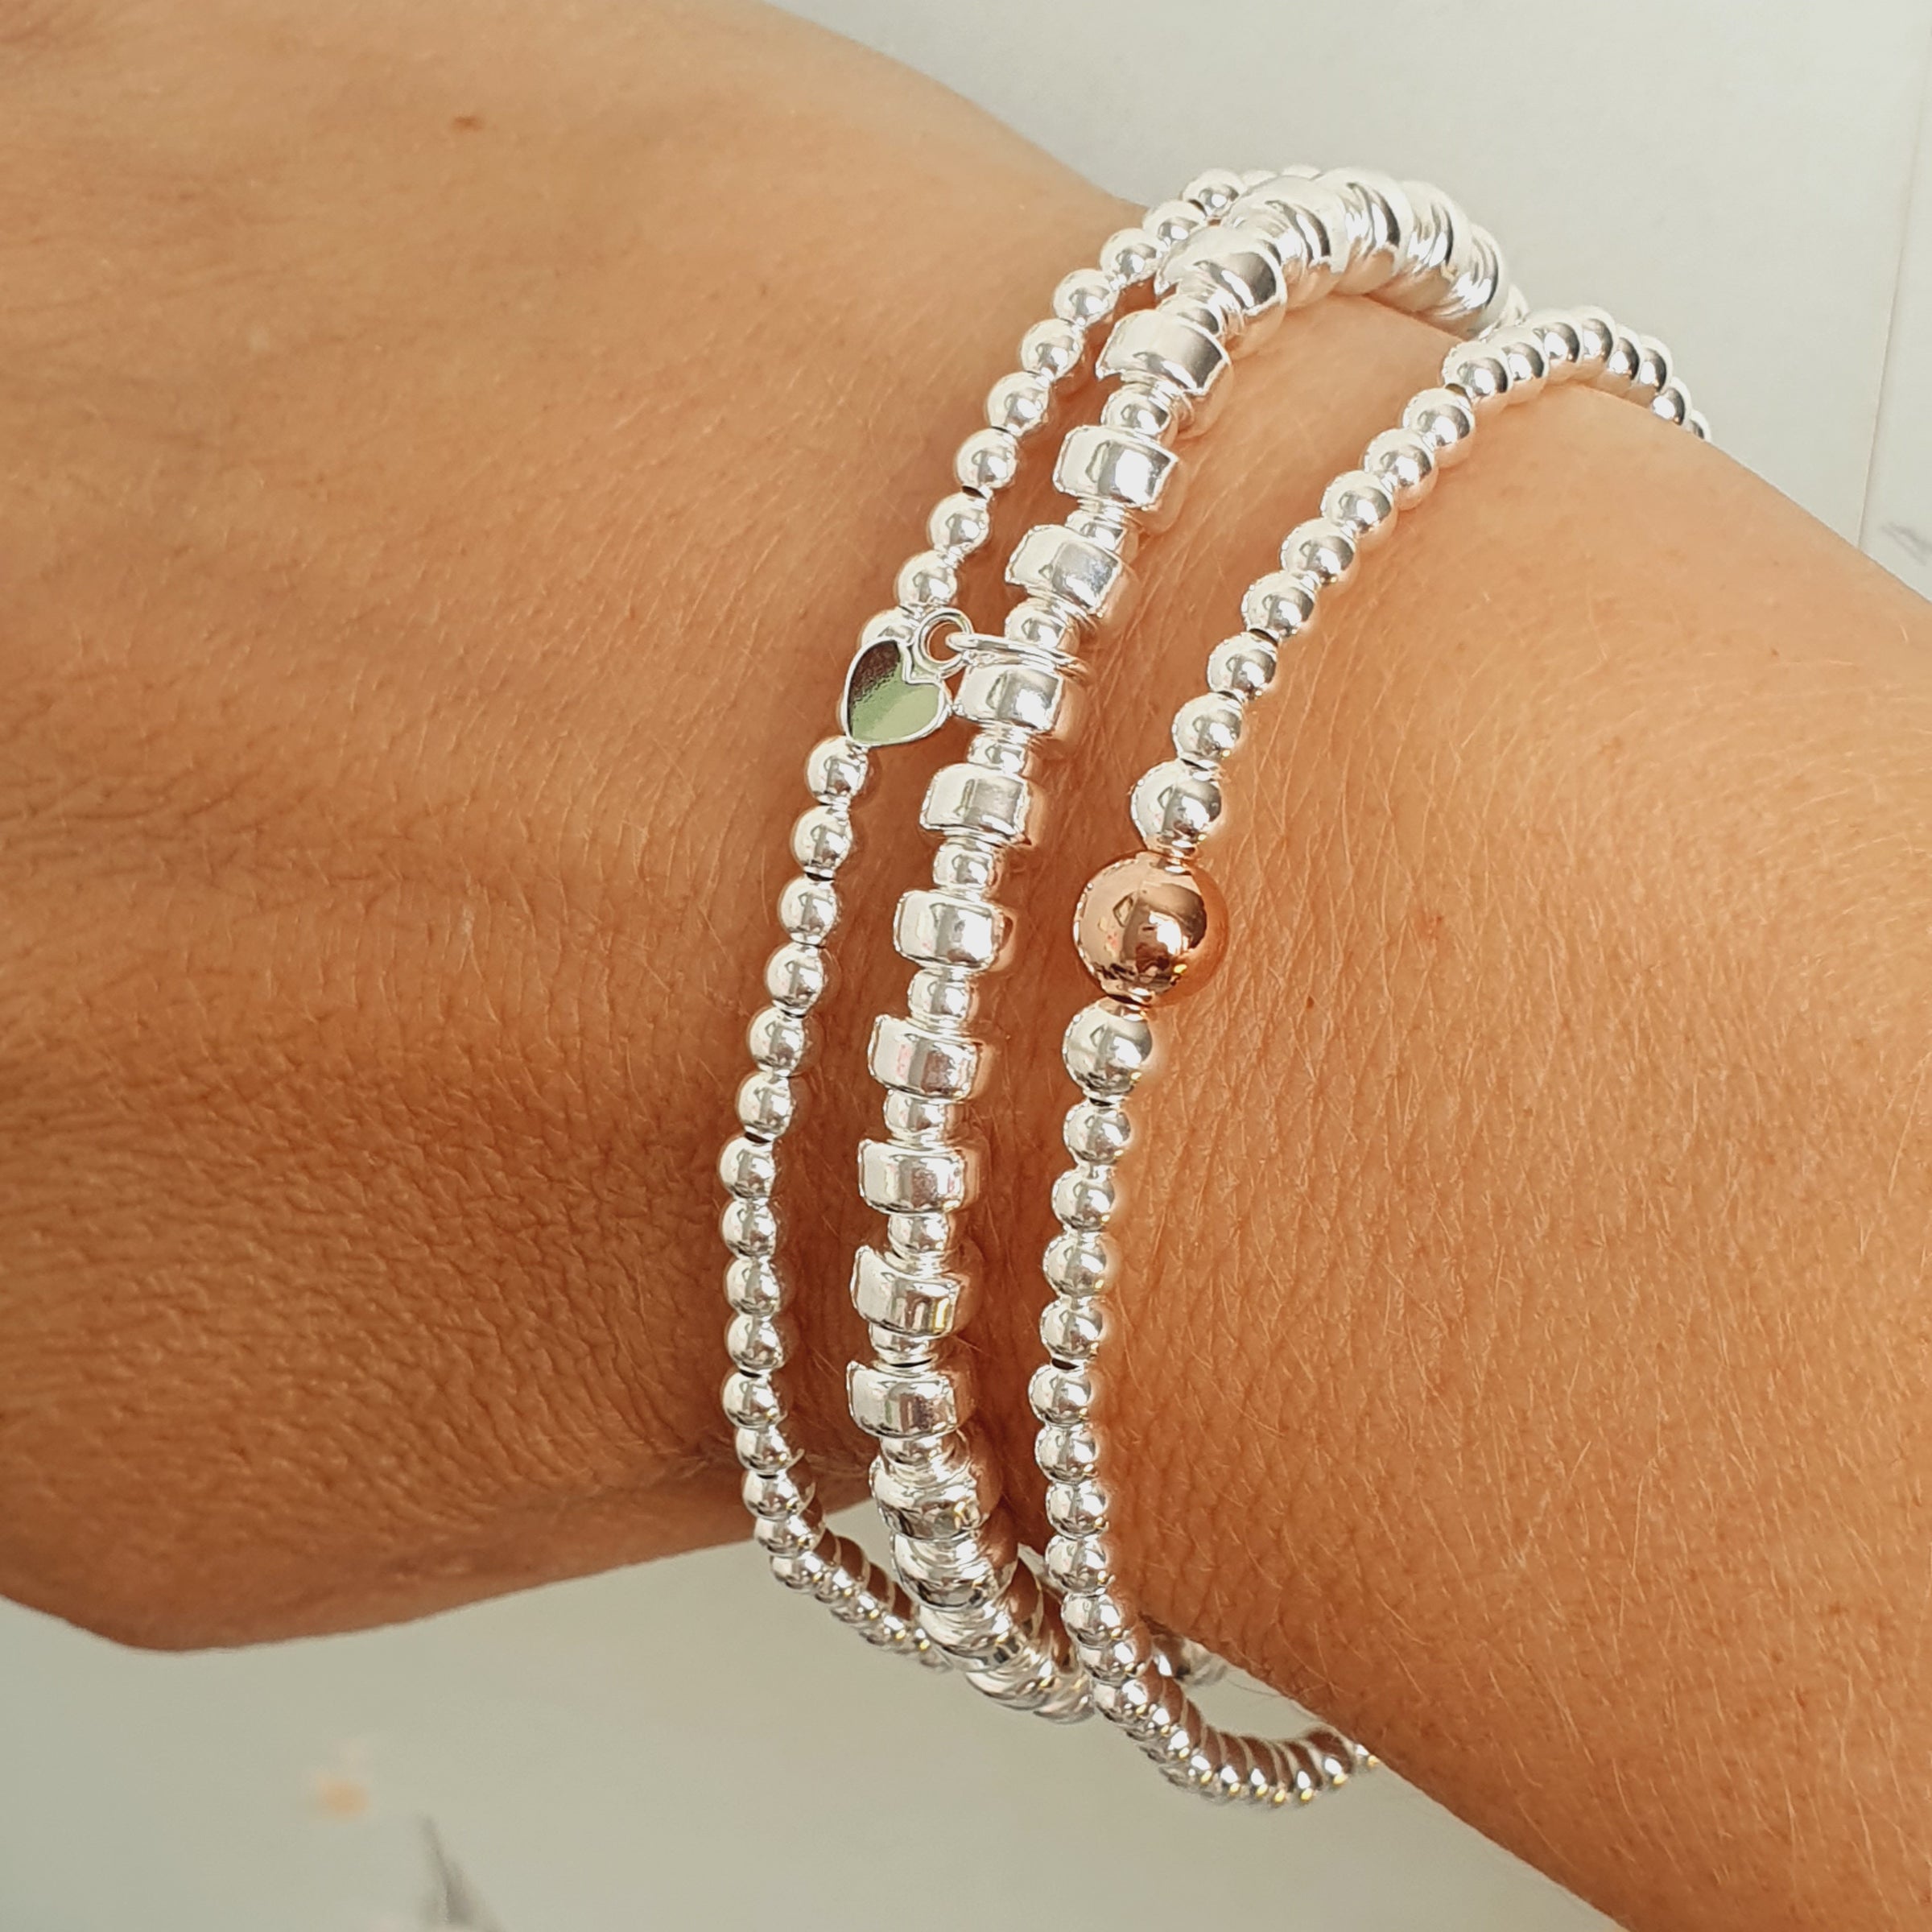 5mm Sterling Silver Beaded Bracelets With Initial Charms - Kelly and Rose  Boutique